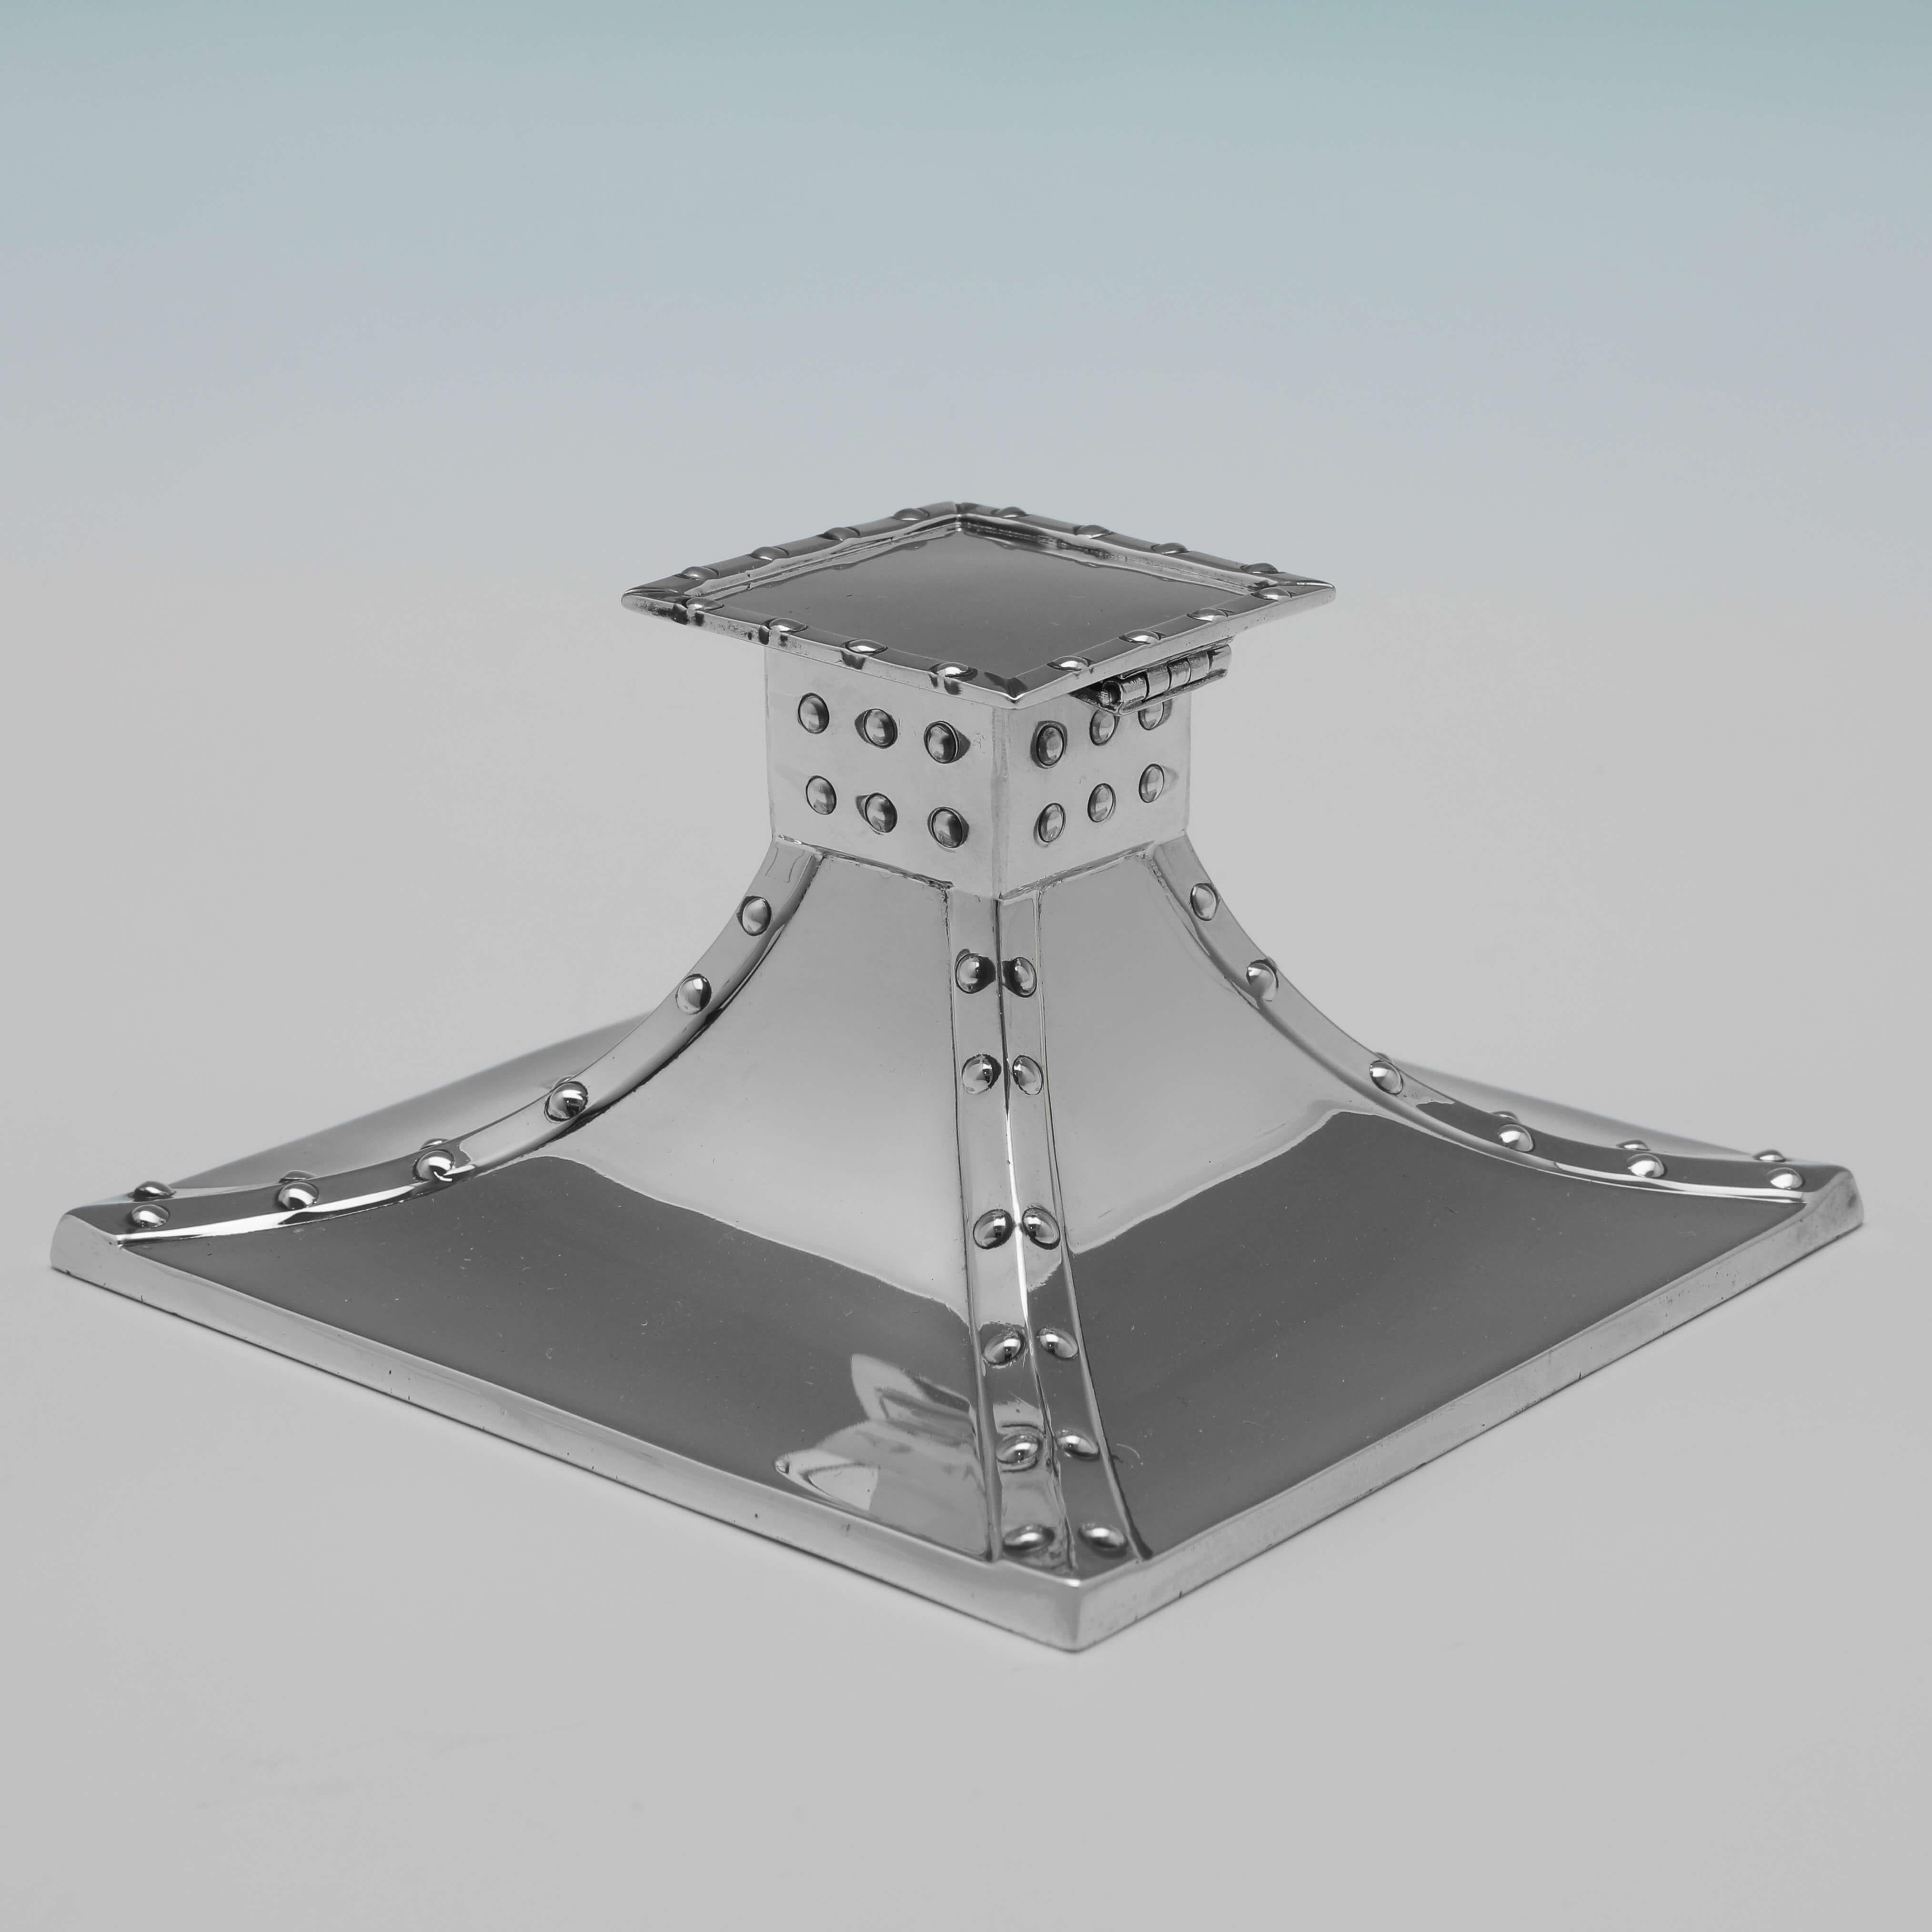 Hallmarked in Sheffield in 1904 by James Dixon & Sons, this very stylish, Antique Sterling Silver Ink Stand, is in the rivet design more often seen in candlesticks of this period. 

The ink stand measures 2.25